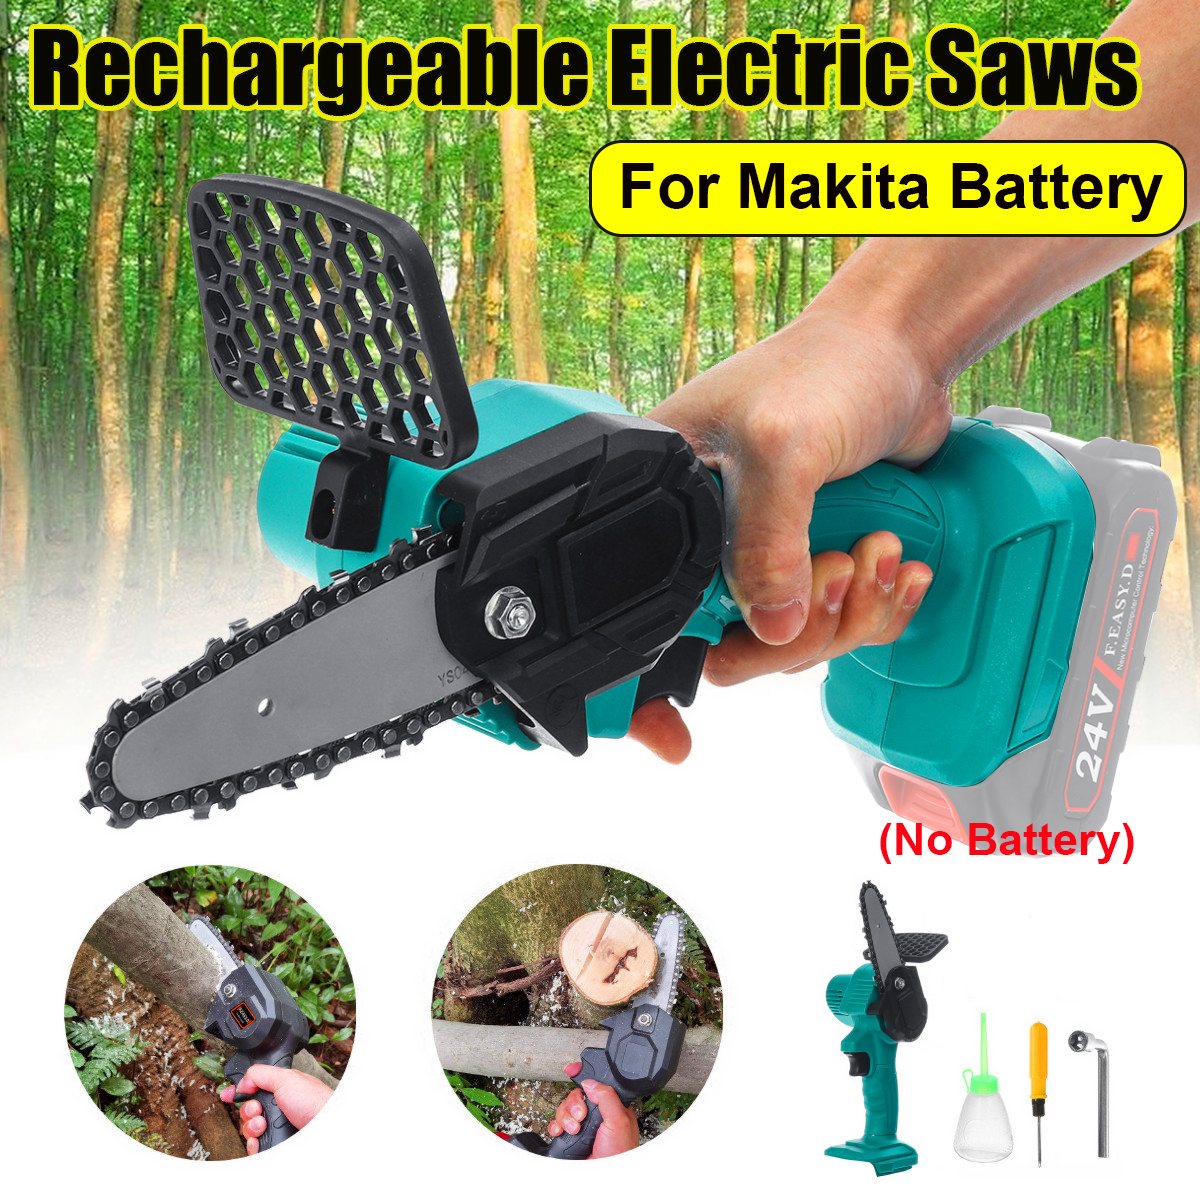 Portable-Electric-Chain-Saw-Woodworking-Wood-Cutting-Sawing-Machine-For-Makita-Battery-1804792-1